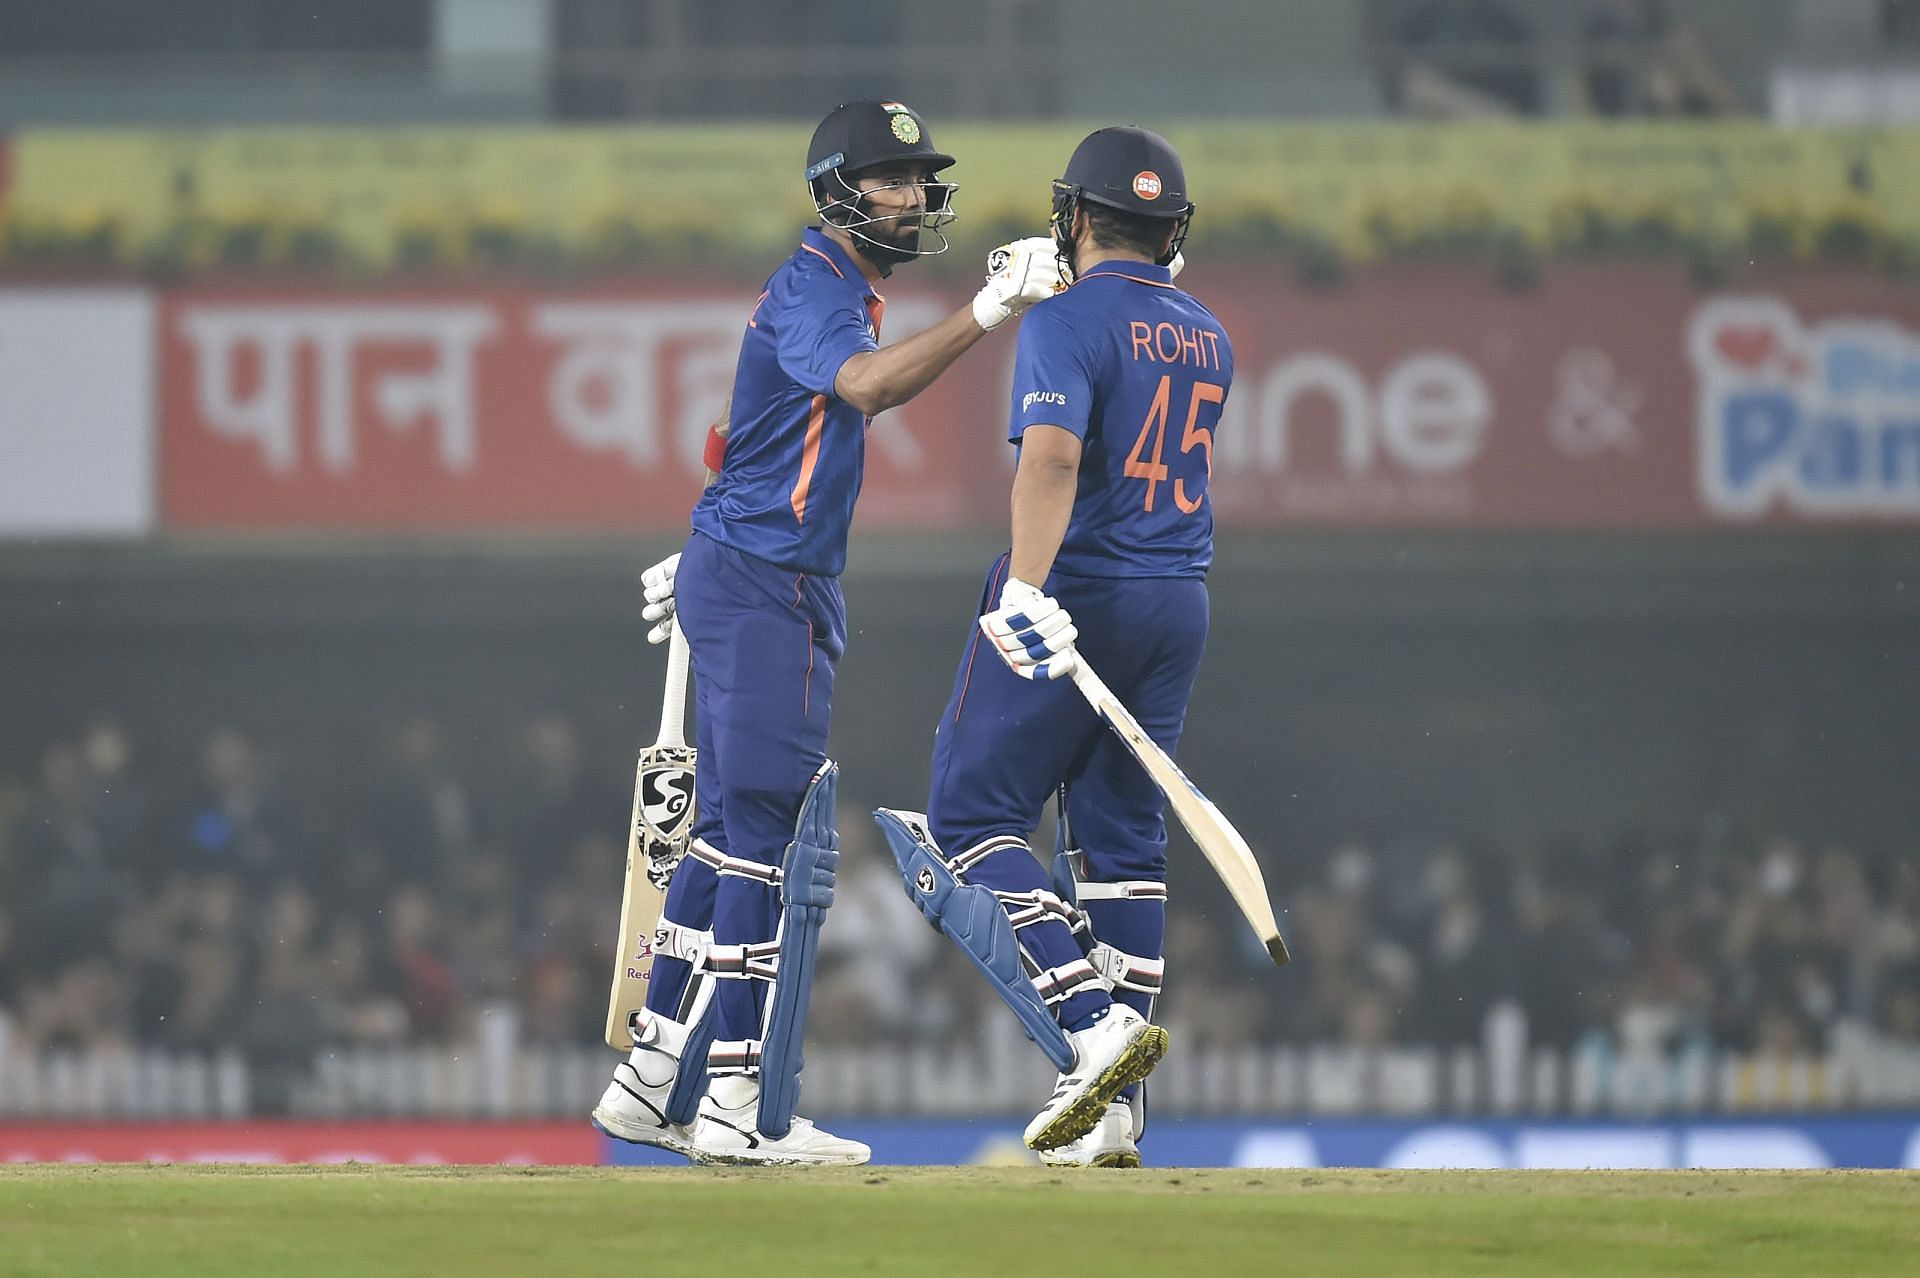 Rohit Sharma and KL Rahul complement each other extremely well